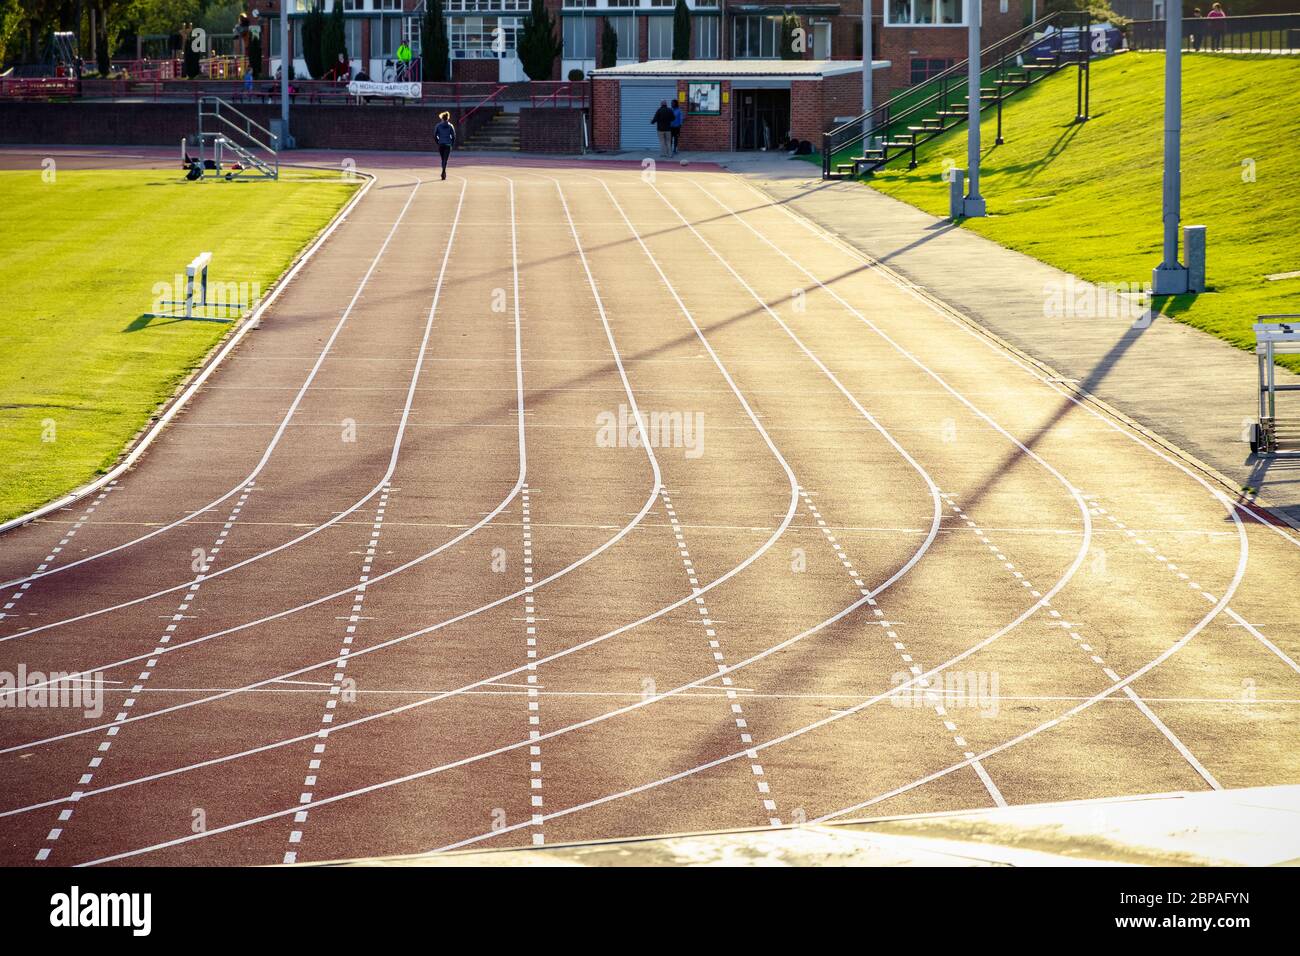 Parliament Hill Fields Athletics Track in London, all-weather running track backlit by sunlight Stock Photo